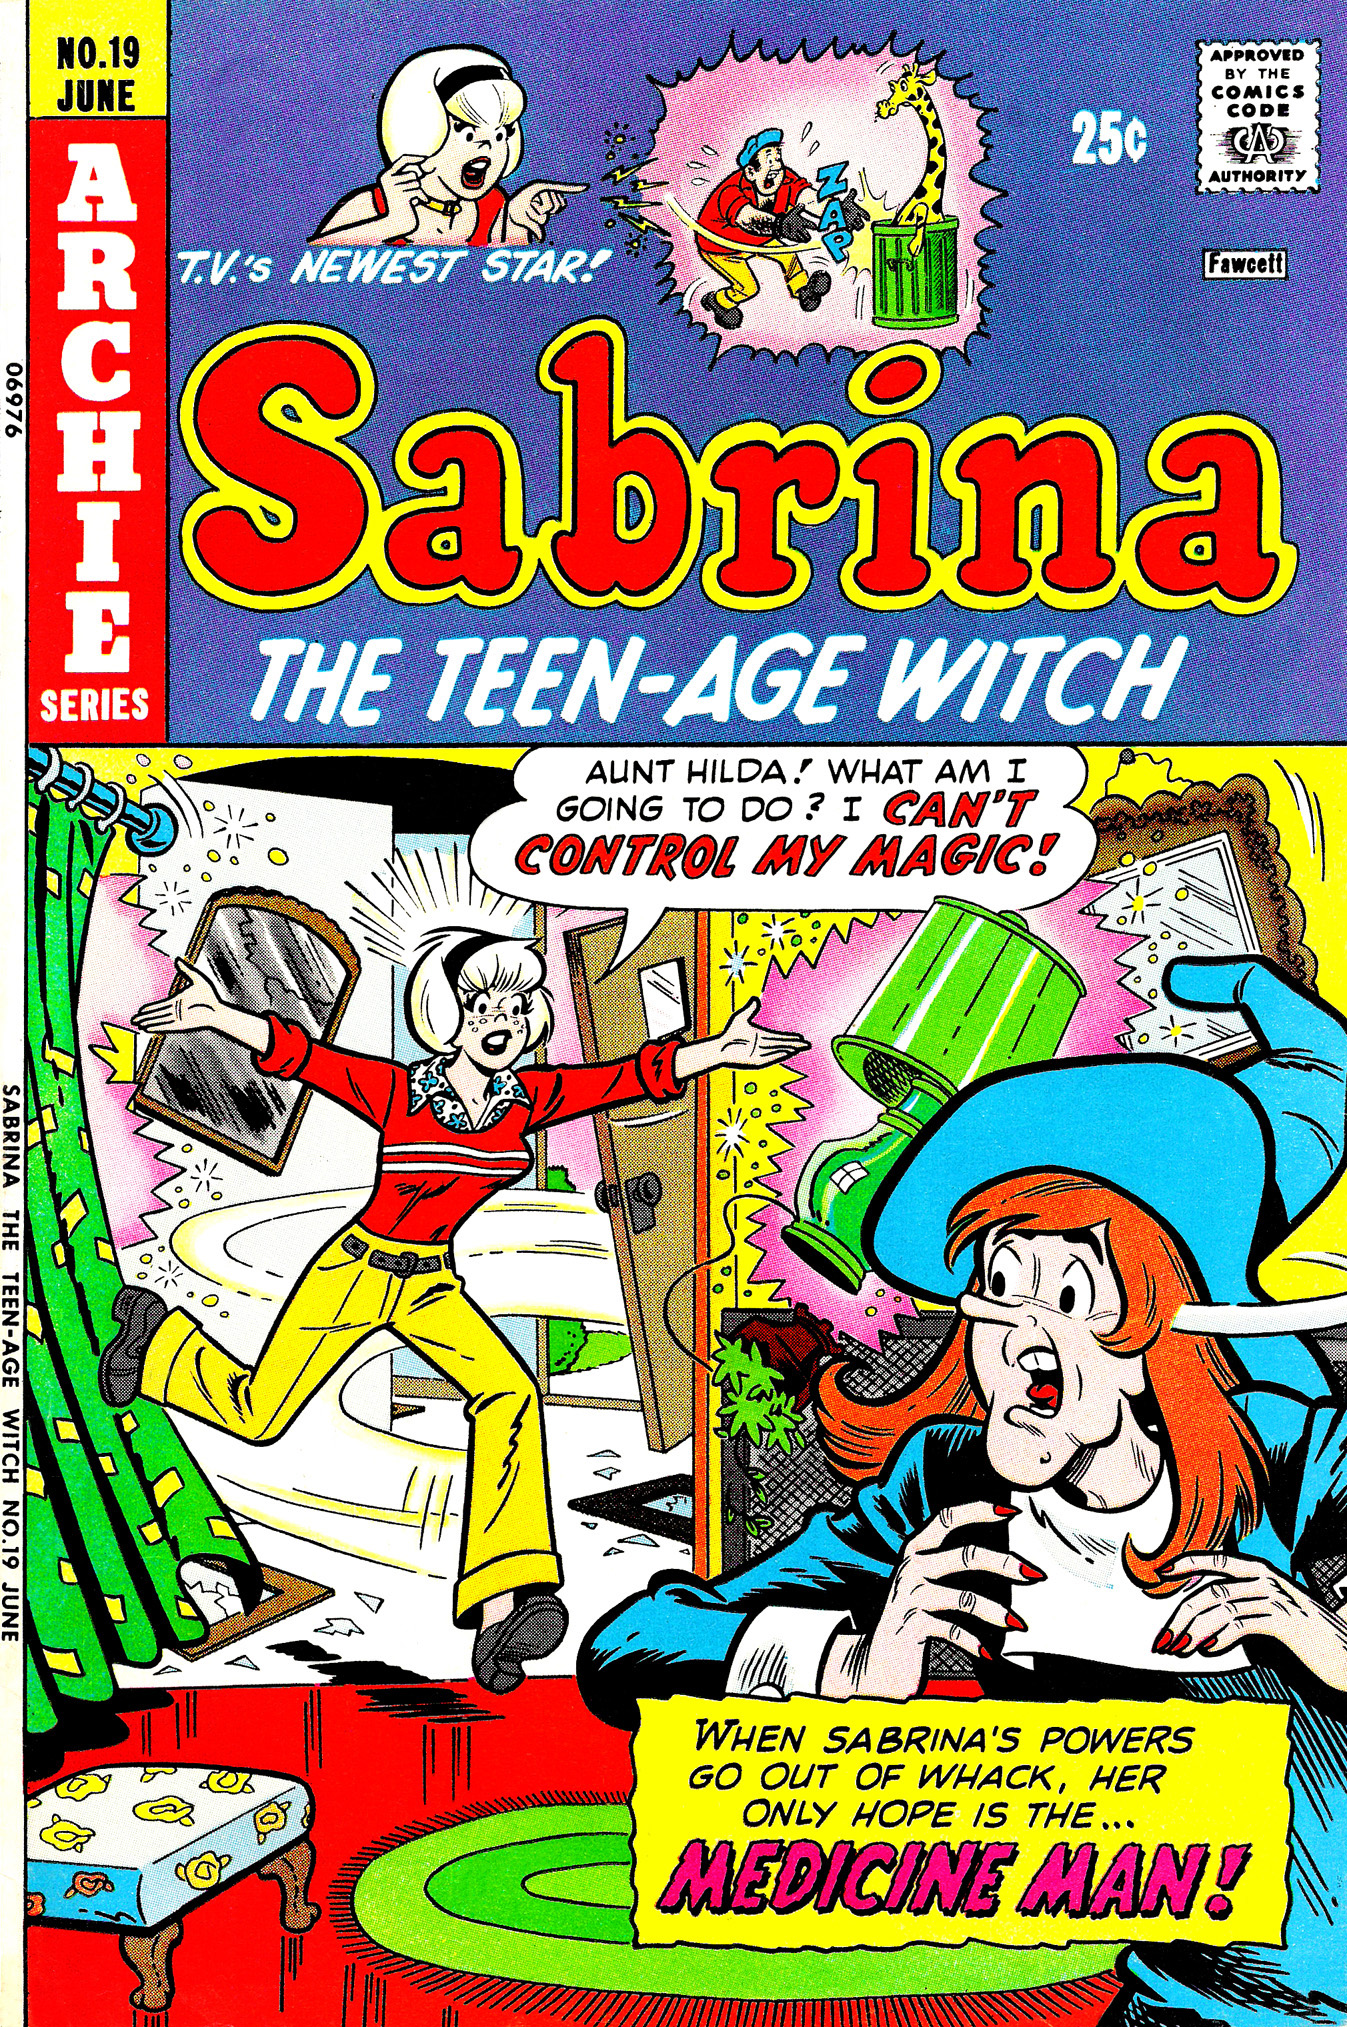 Sabrina The Teenage Witch (1971) Issue #19 #19 - English 1